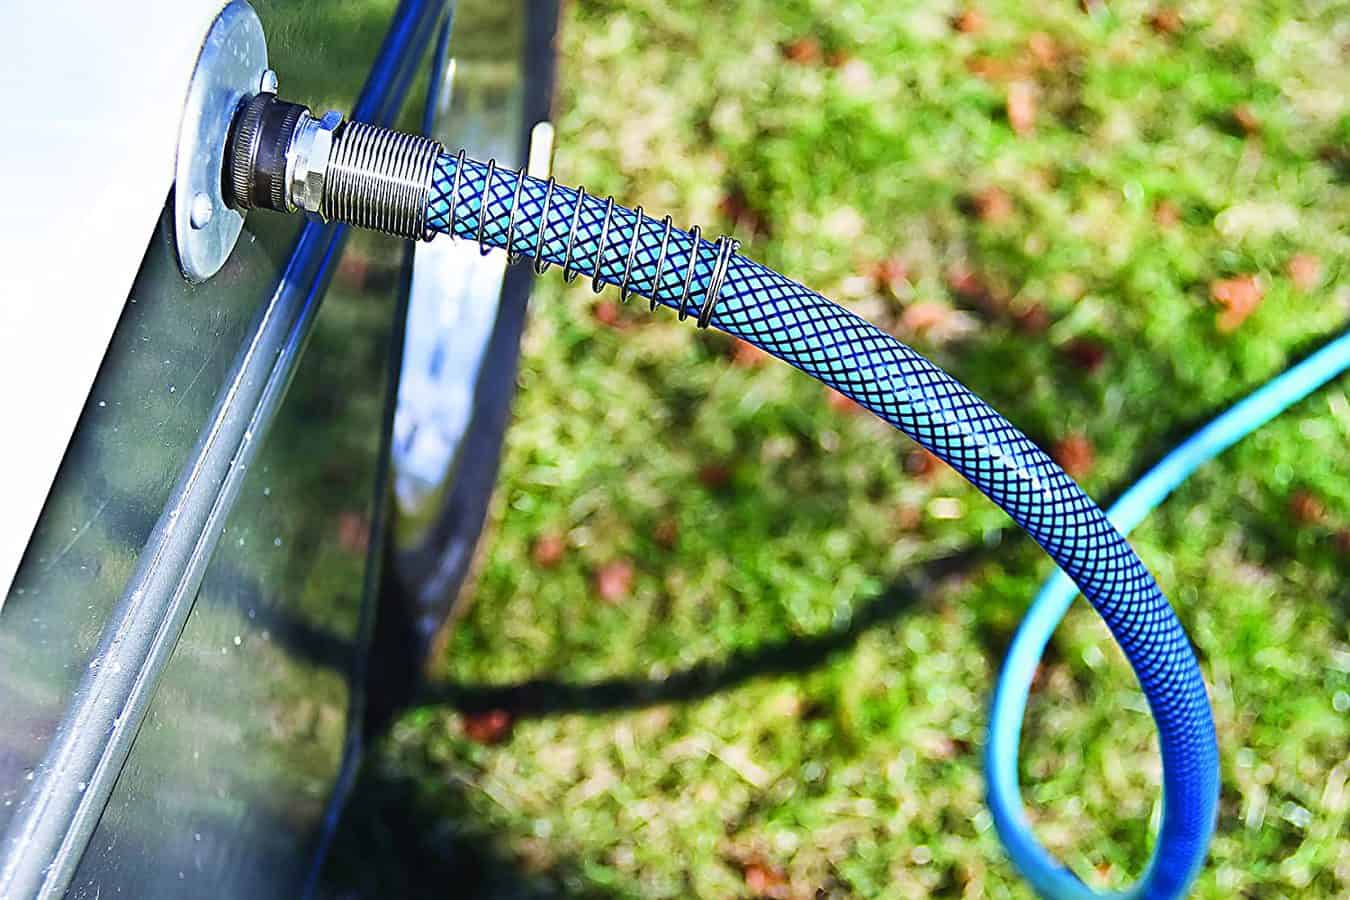 Long Expandable Garden Hose 25 Ft Portable Water Hose Heavy Duty Water Hose Retractable Hose for Gardening Car Wash RV Motorhome Camper Accessories Flexible Kink Free Marine Hose 